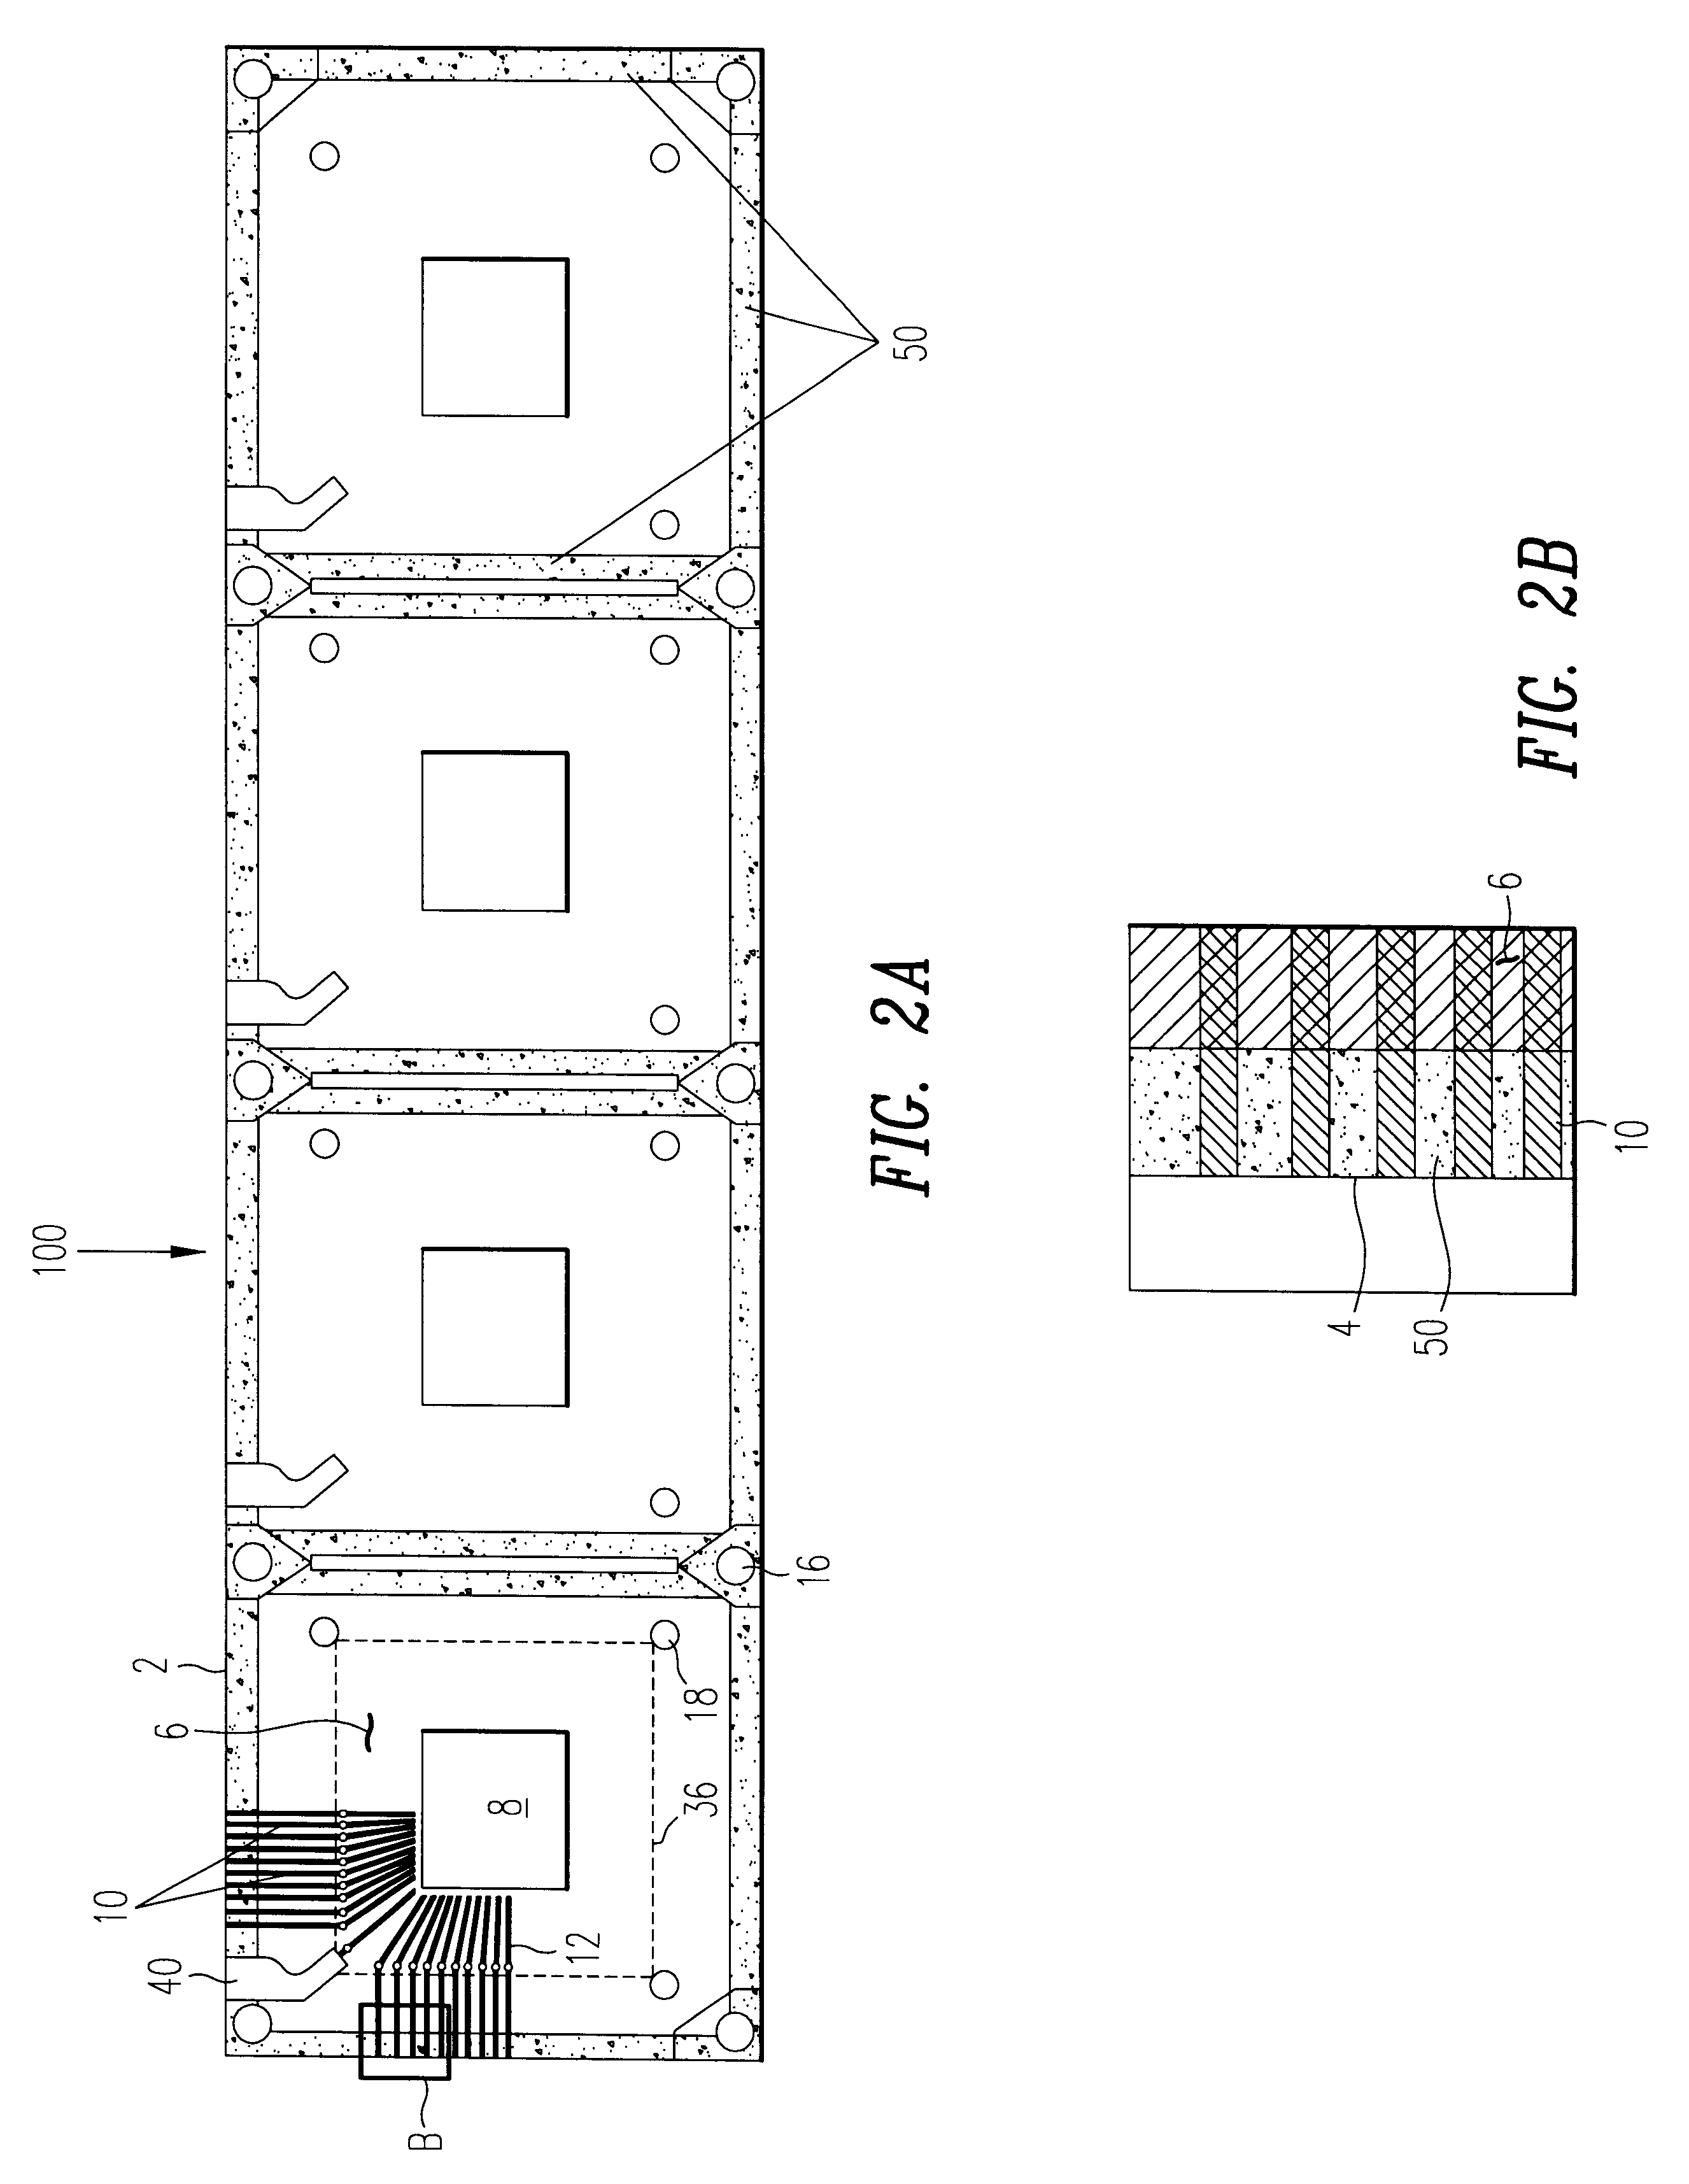 Circuit board for semiconductor package